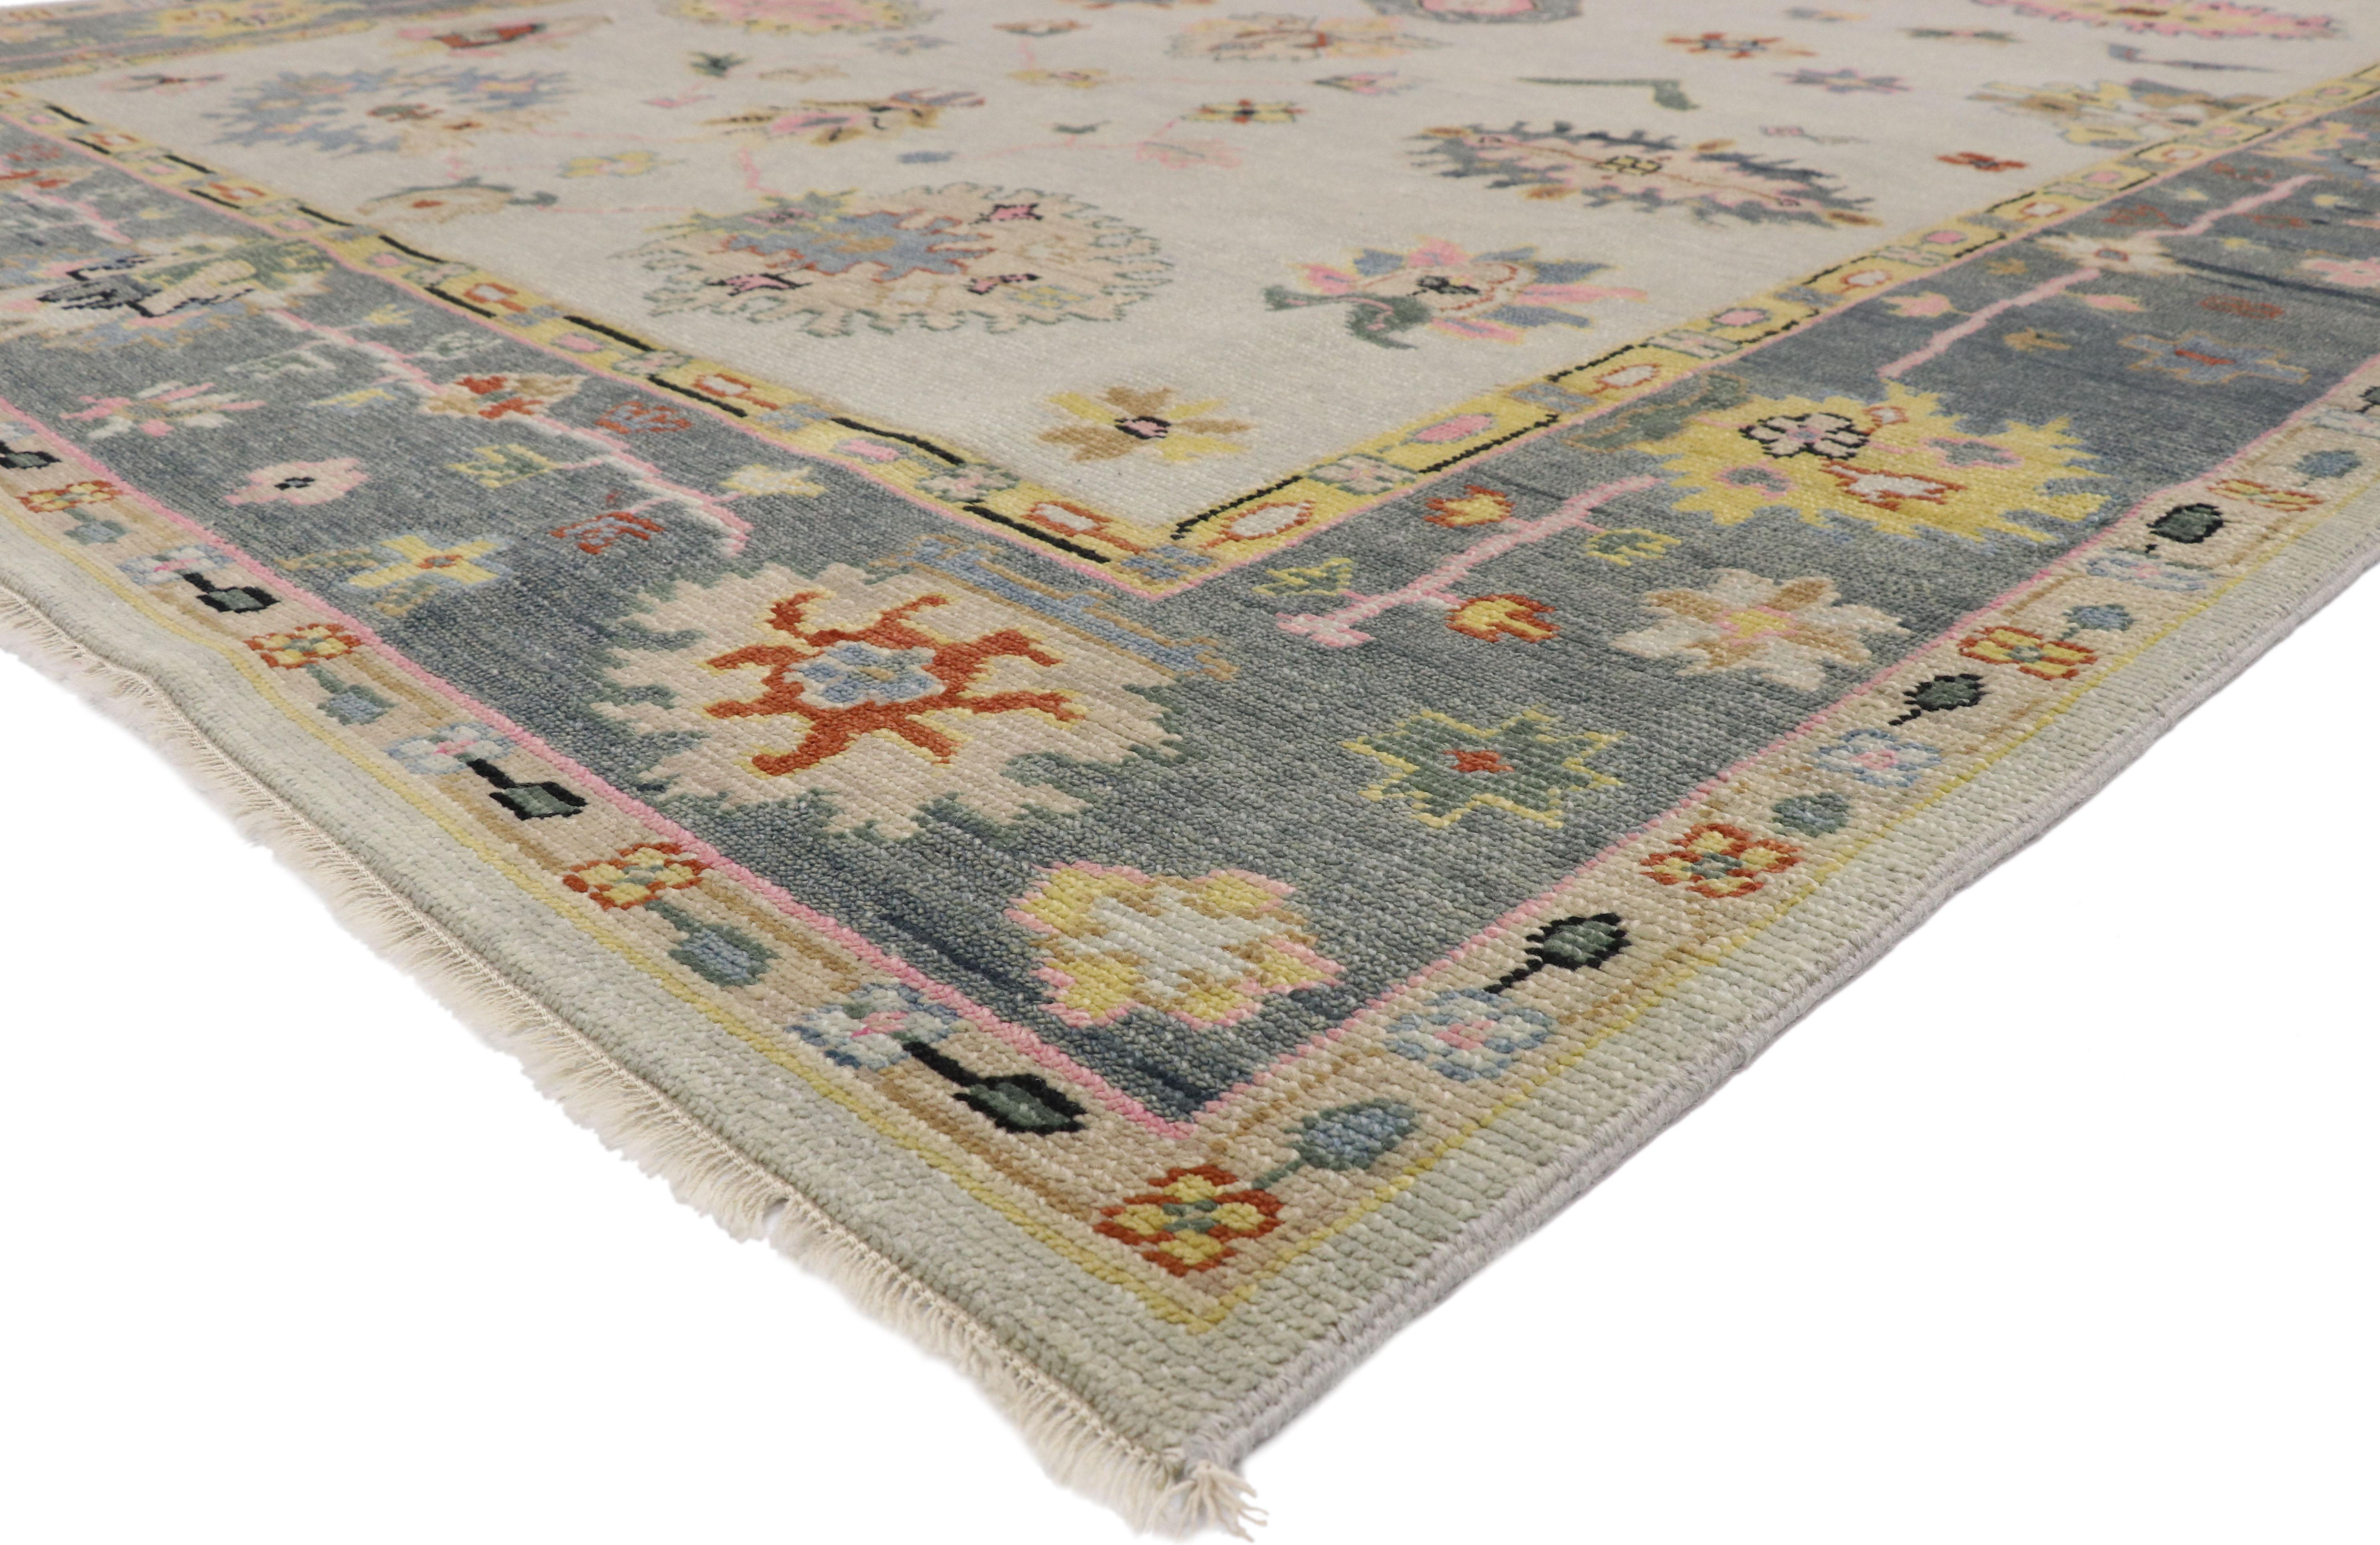 77389 New Contemporary Oushak Transitional Area Rug, Vintage Inspired Area Rug. The large-scale geometric print and pops of pastel colors woven into this hand knotted wool contemporary oushak transitional area rug work together creating a truly